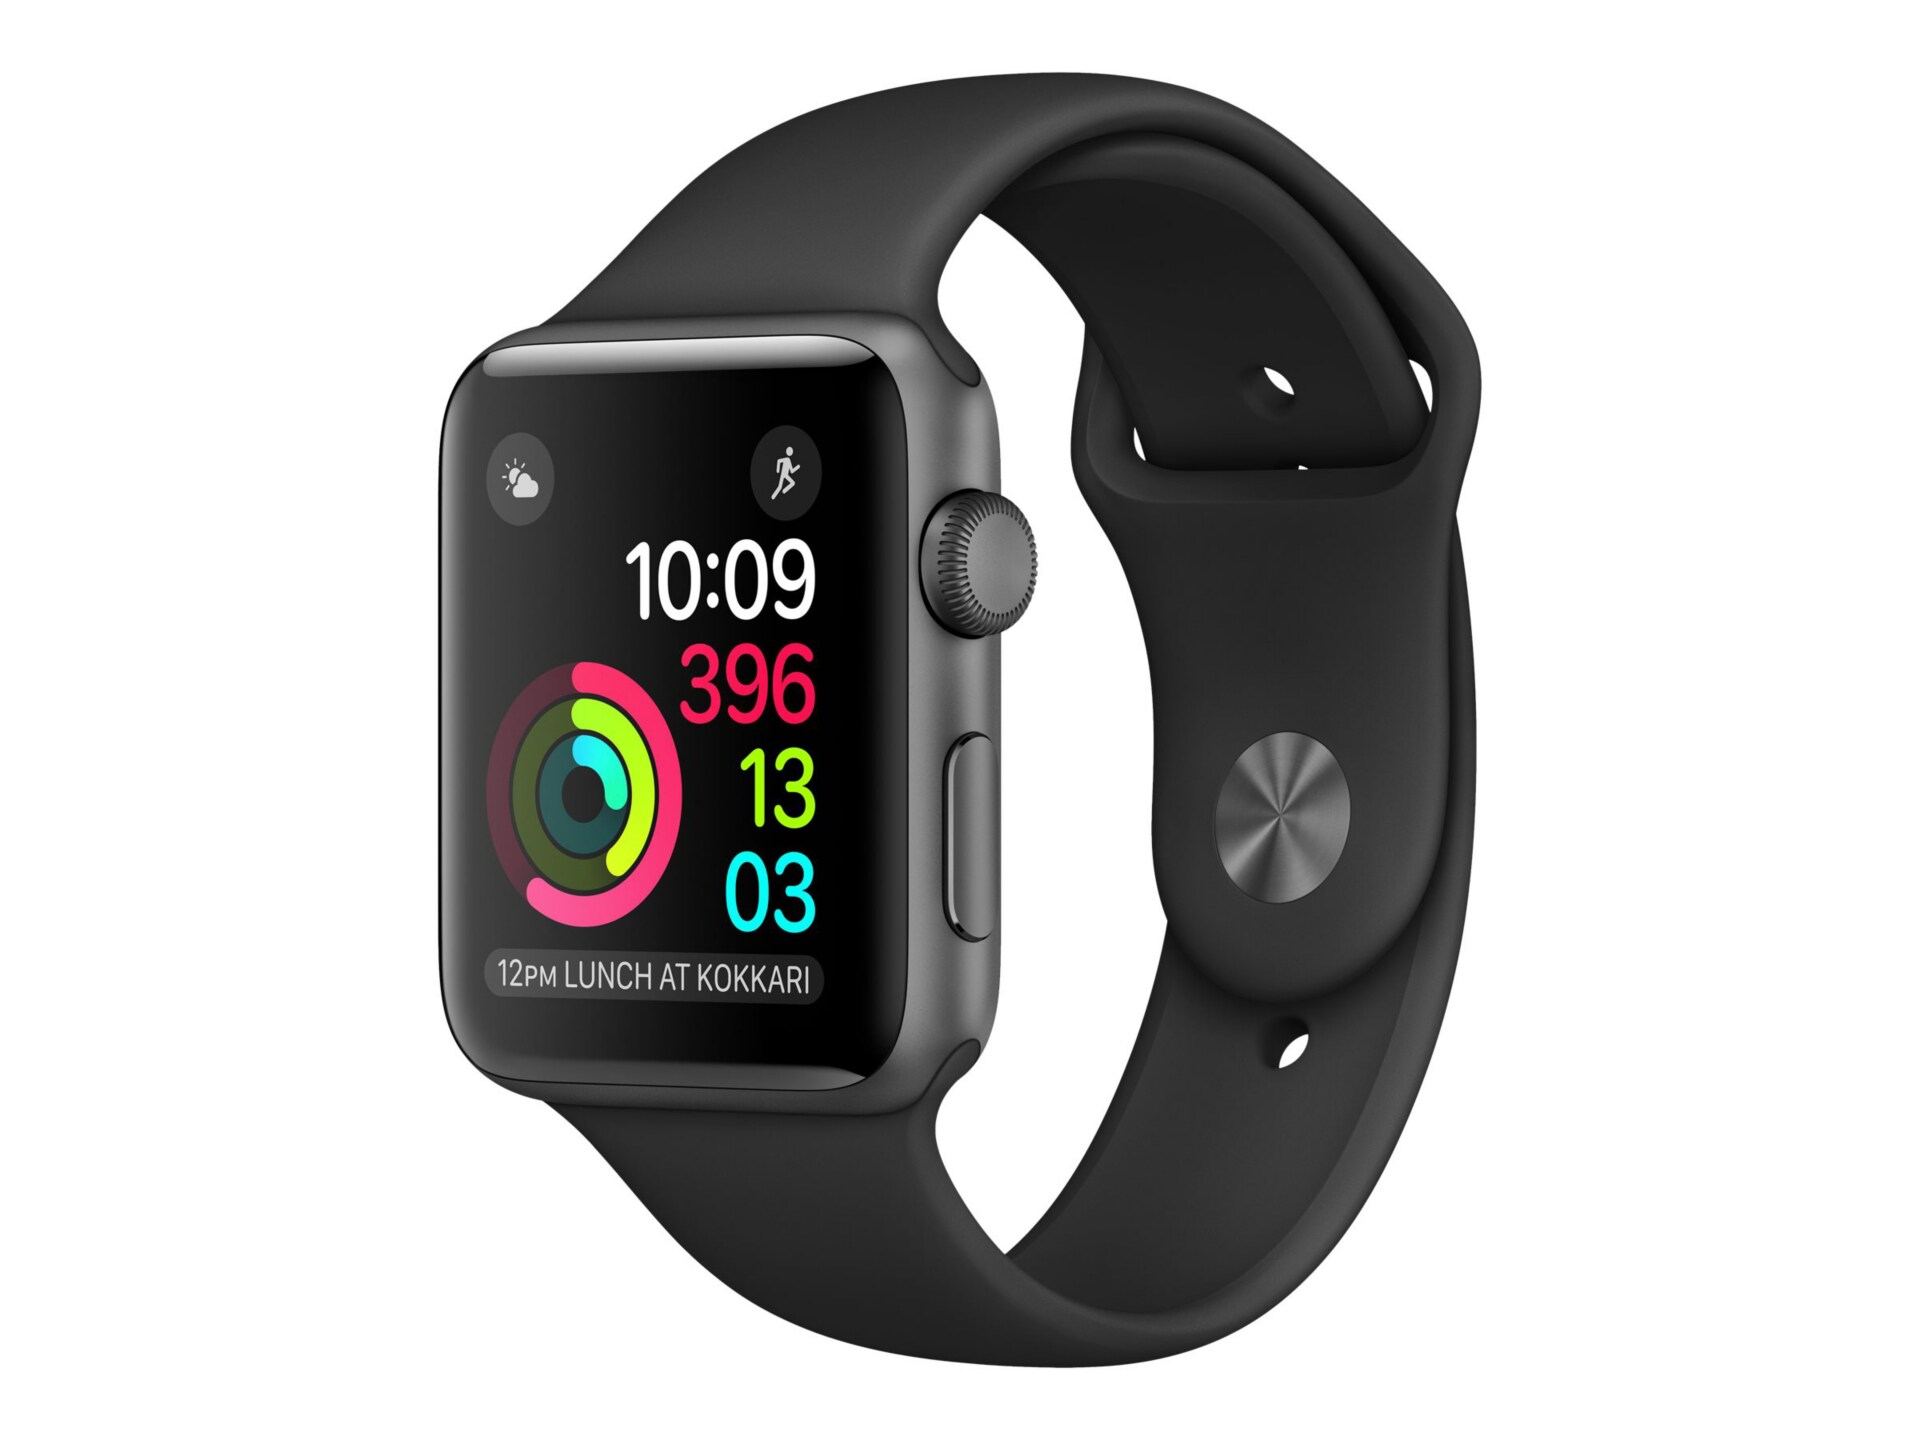 Apple Watch Series 2 - space gray aluminum - smart watch with sport band - black